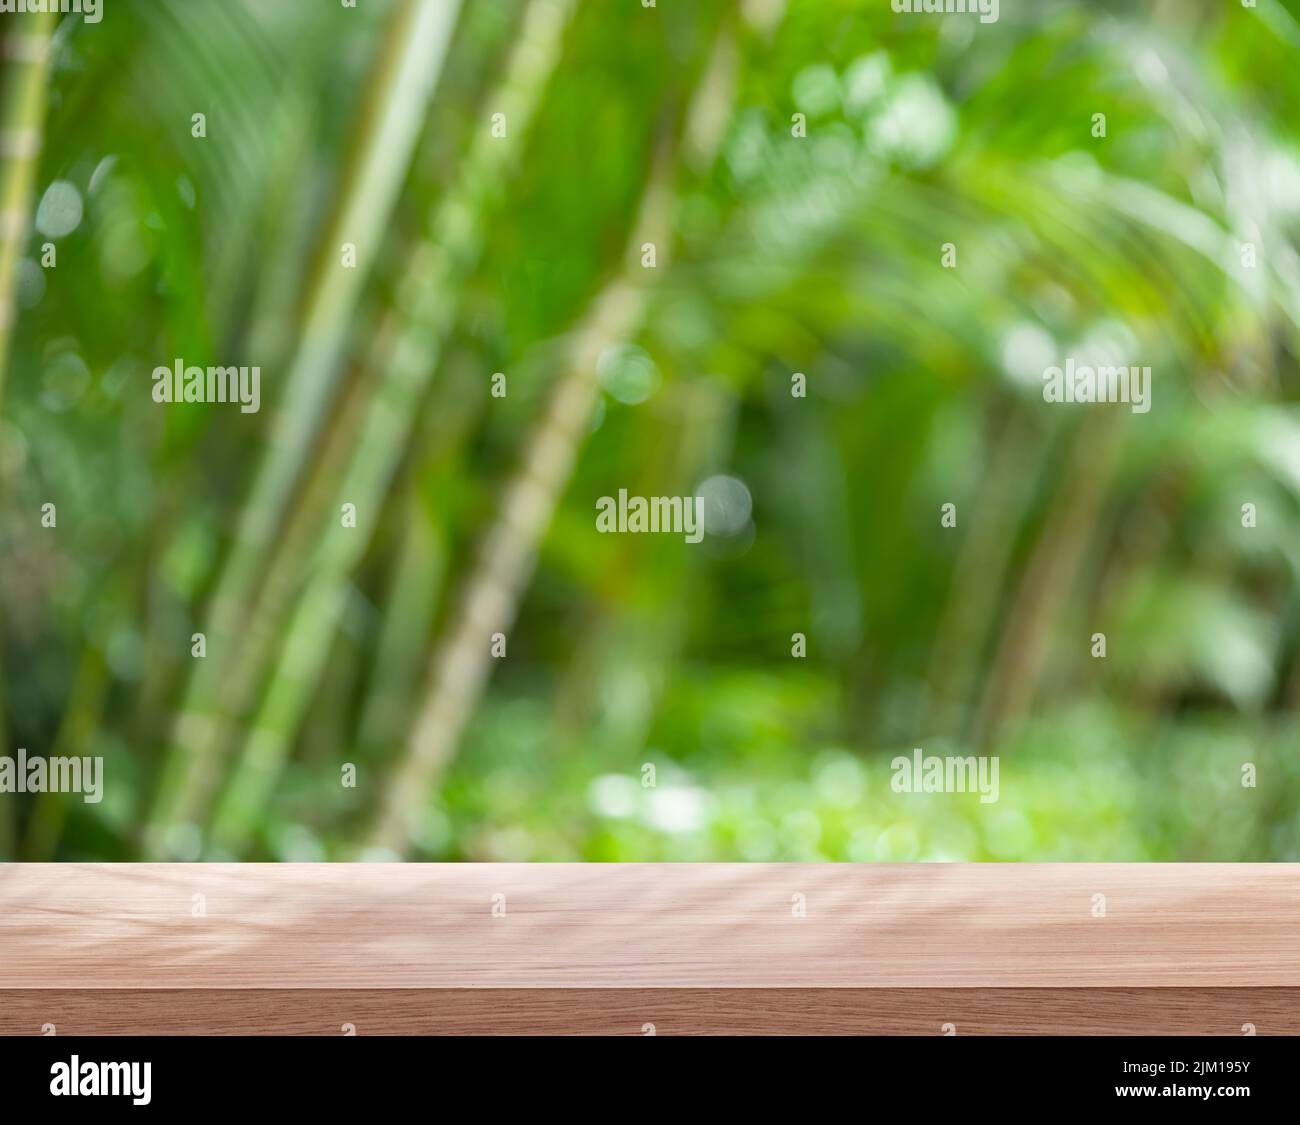 Empty board or table top and blurred green bamboo culms. Place for your product display. Stock Photo